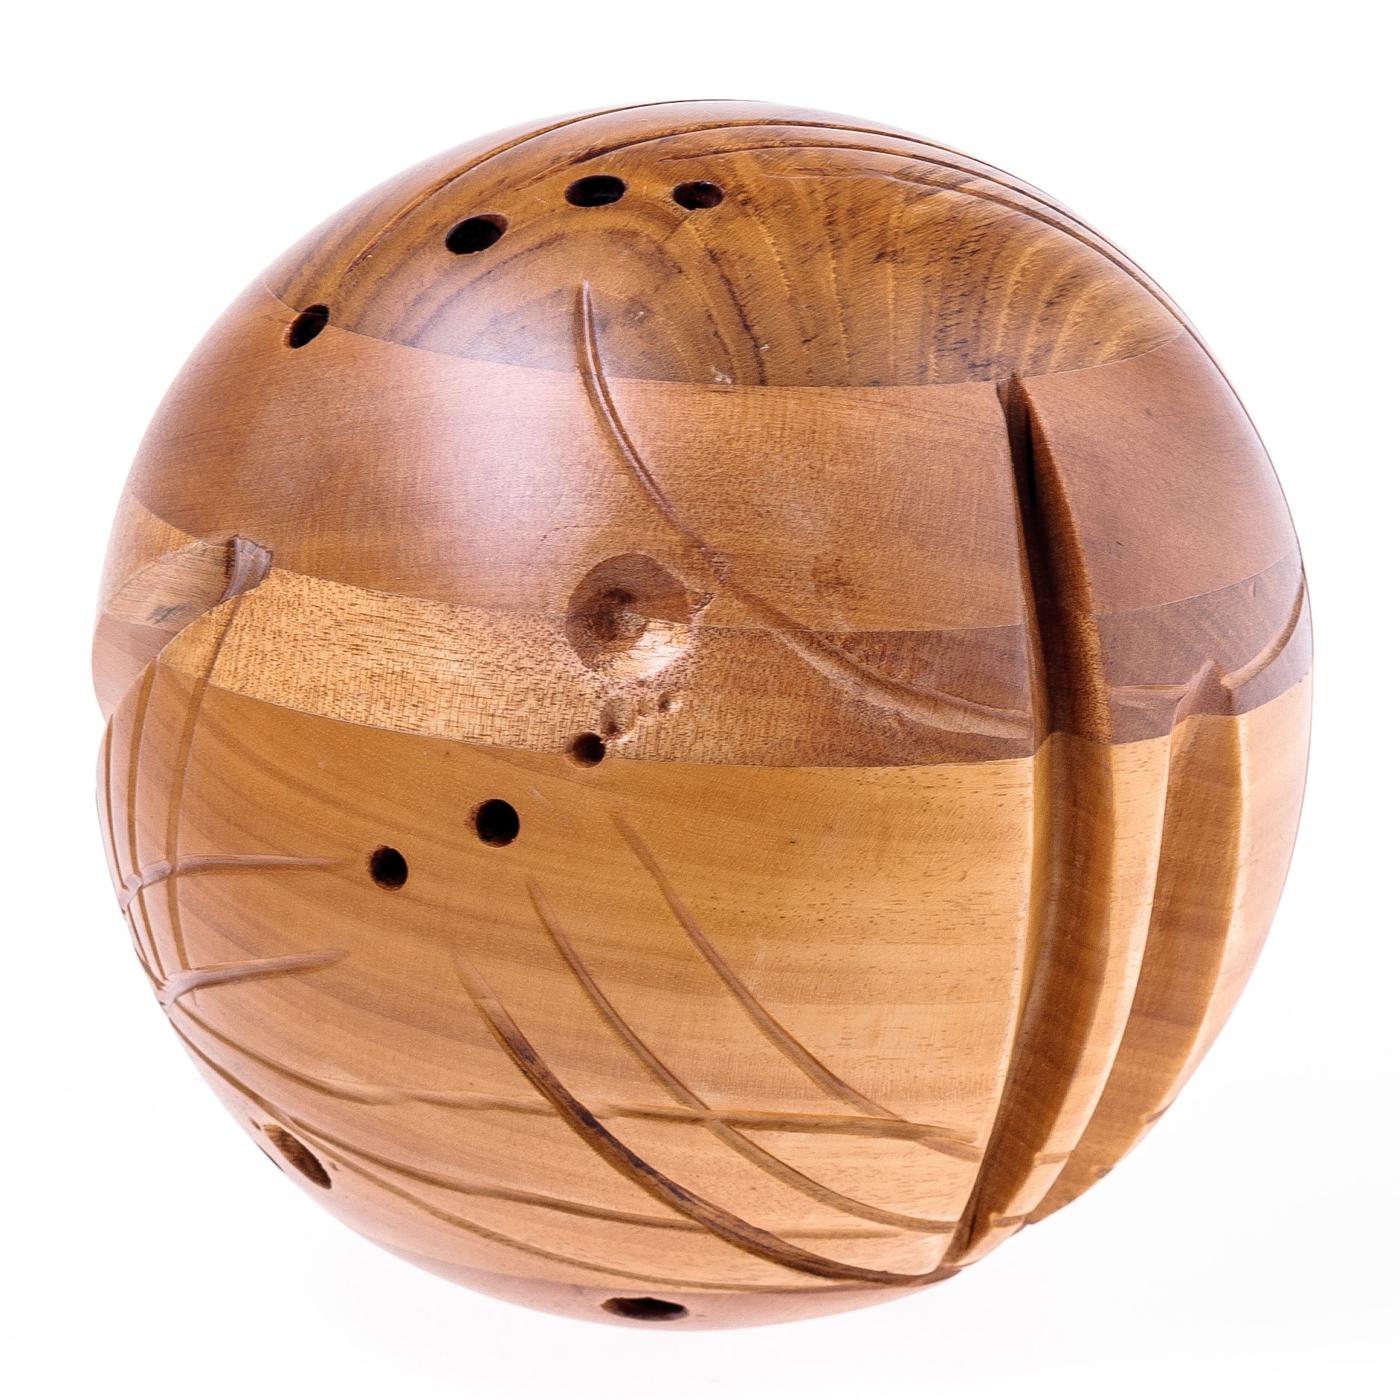 Unconventional and masterfully well-crafted, this spherical sculpture is a testament to the versatility and ageless beauty of wood. Crafted entirely by hand, layers European woods (ash, walnut and chestnut) are hand assembled, carved, and polished